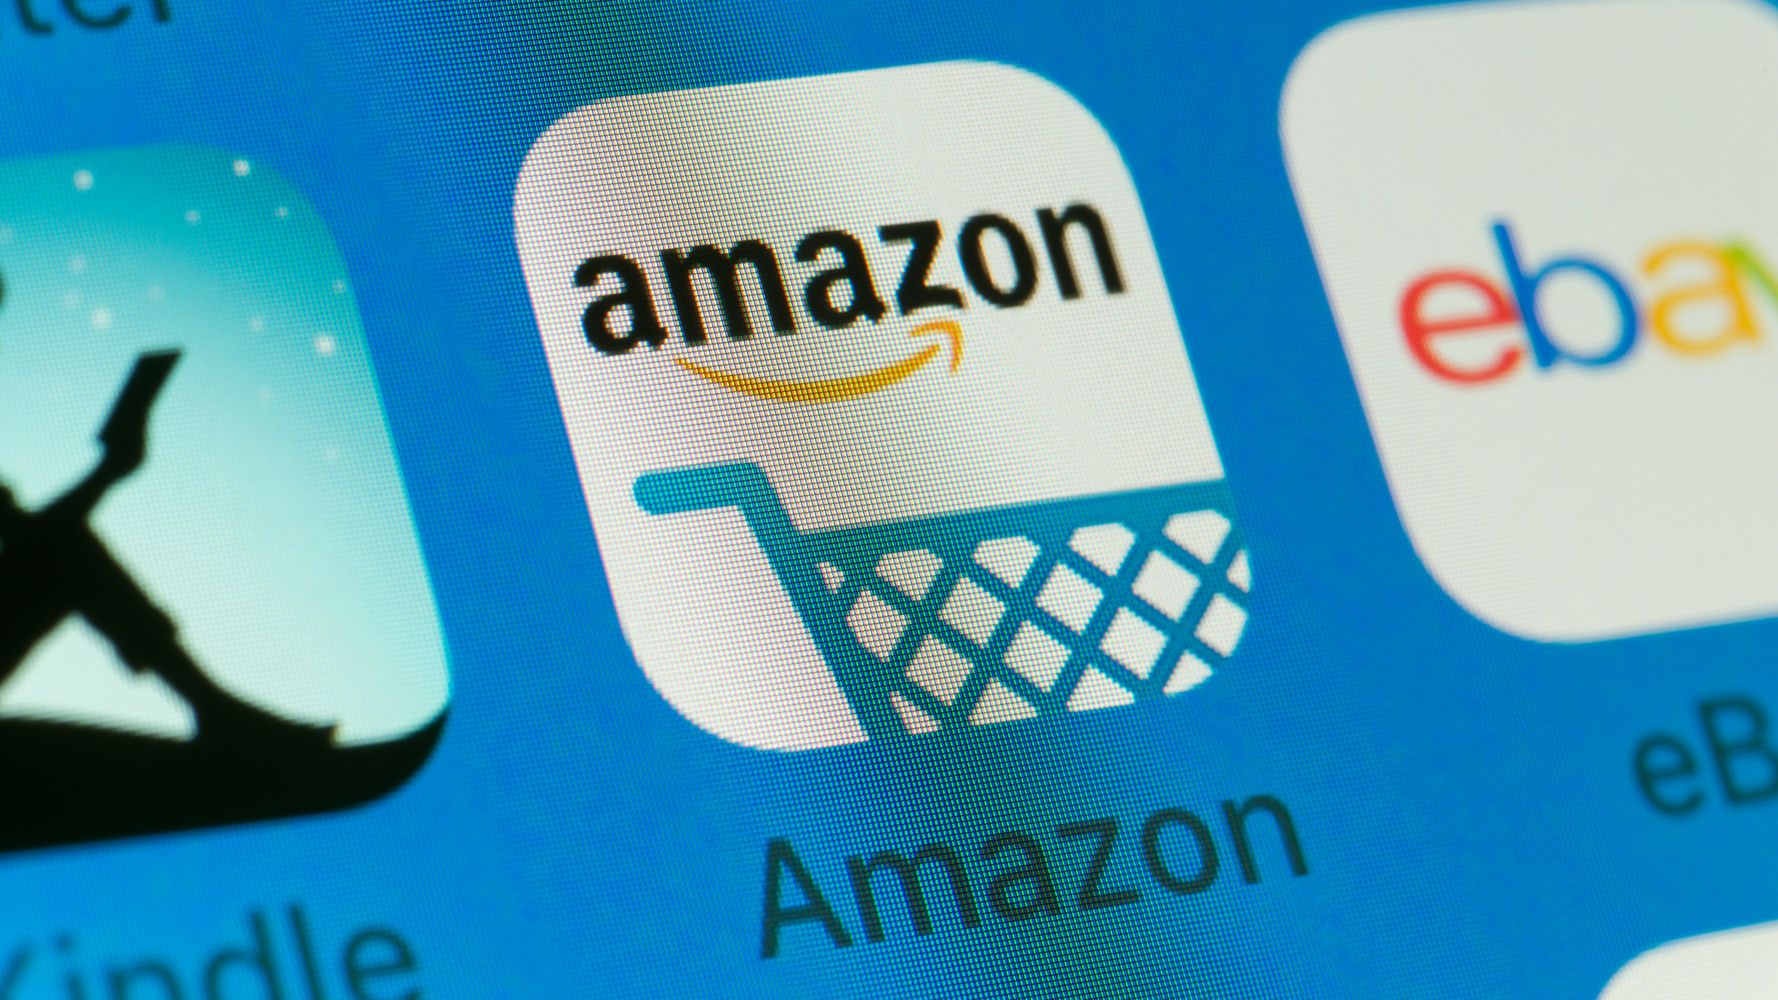 What To Buy At Amazon On Black Friday 2020